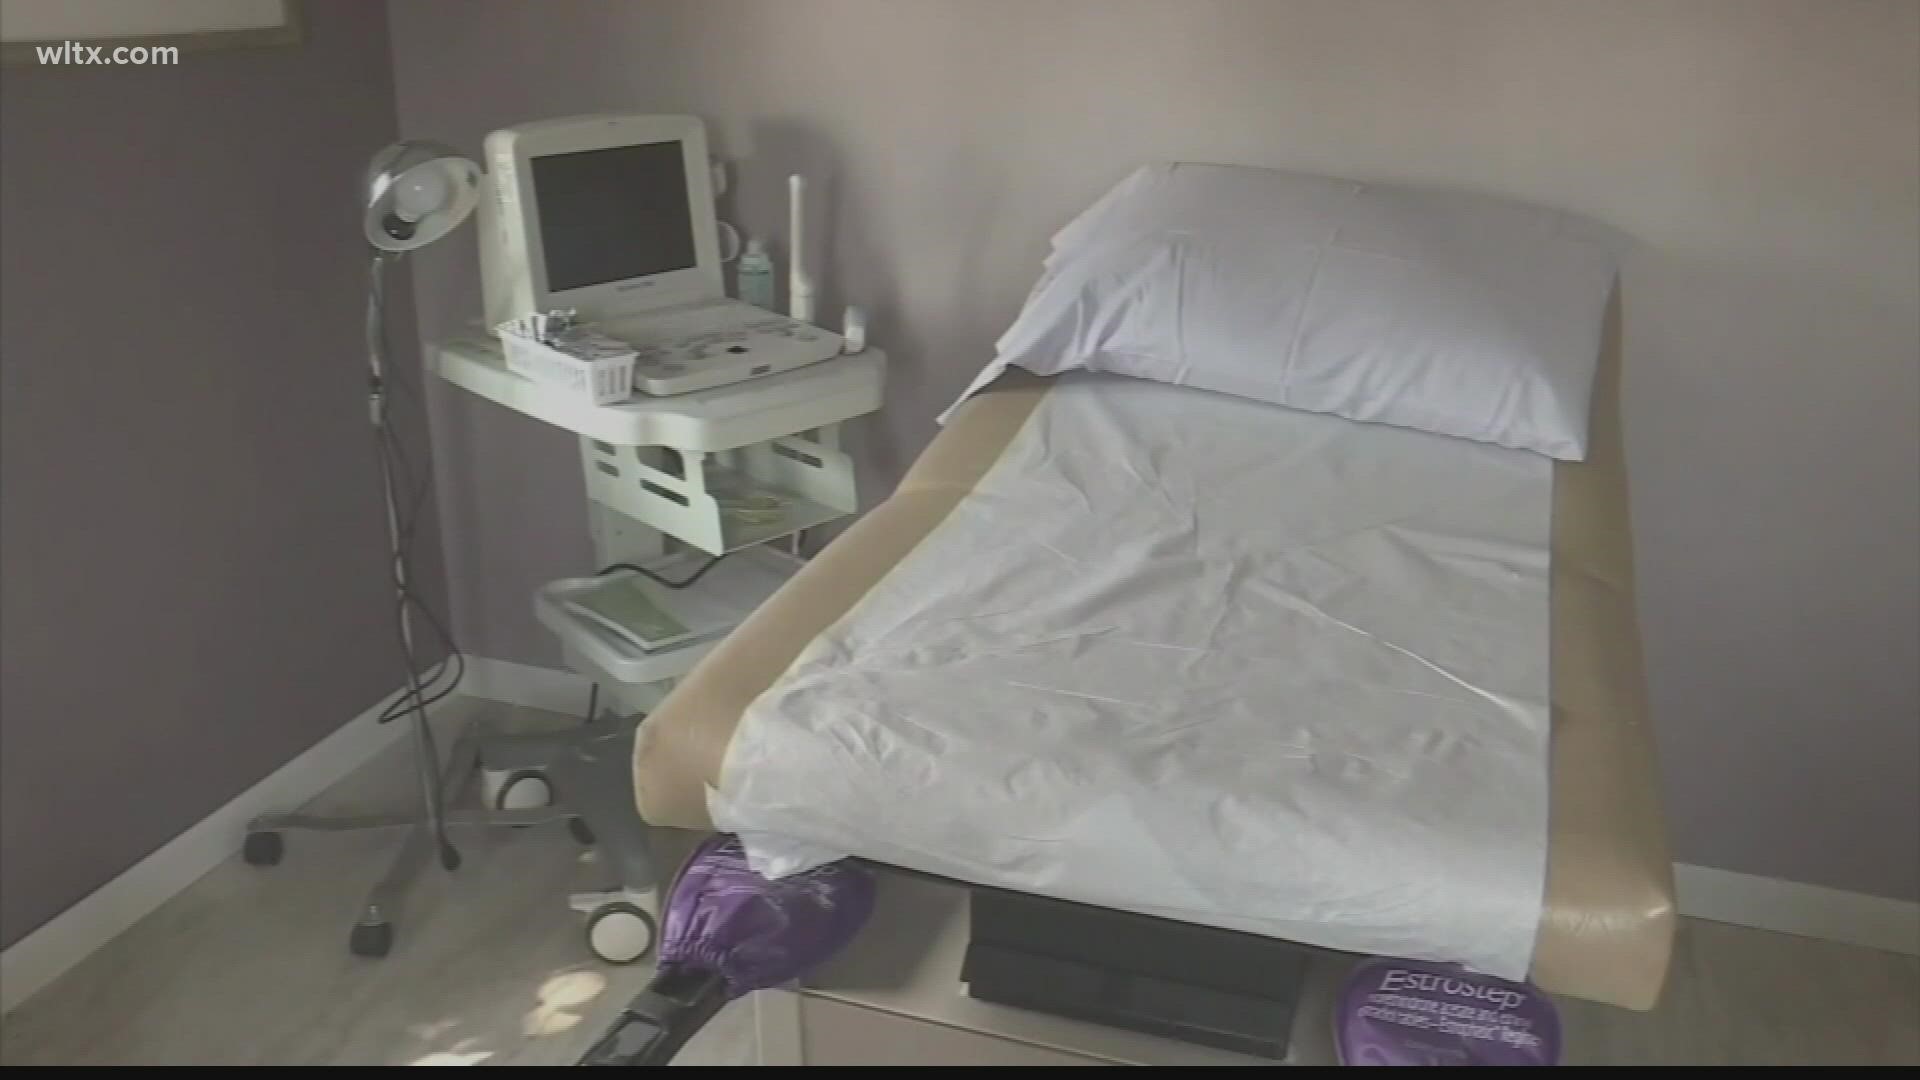 An appellate court is set to debate a lawsuit challenging South Carolina’s abortion law.